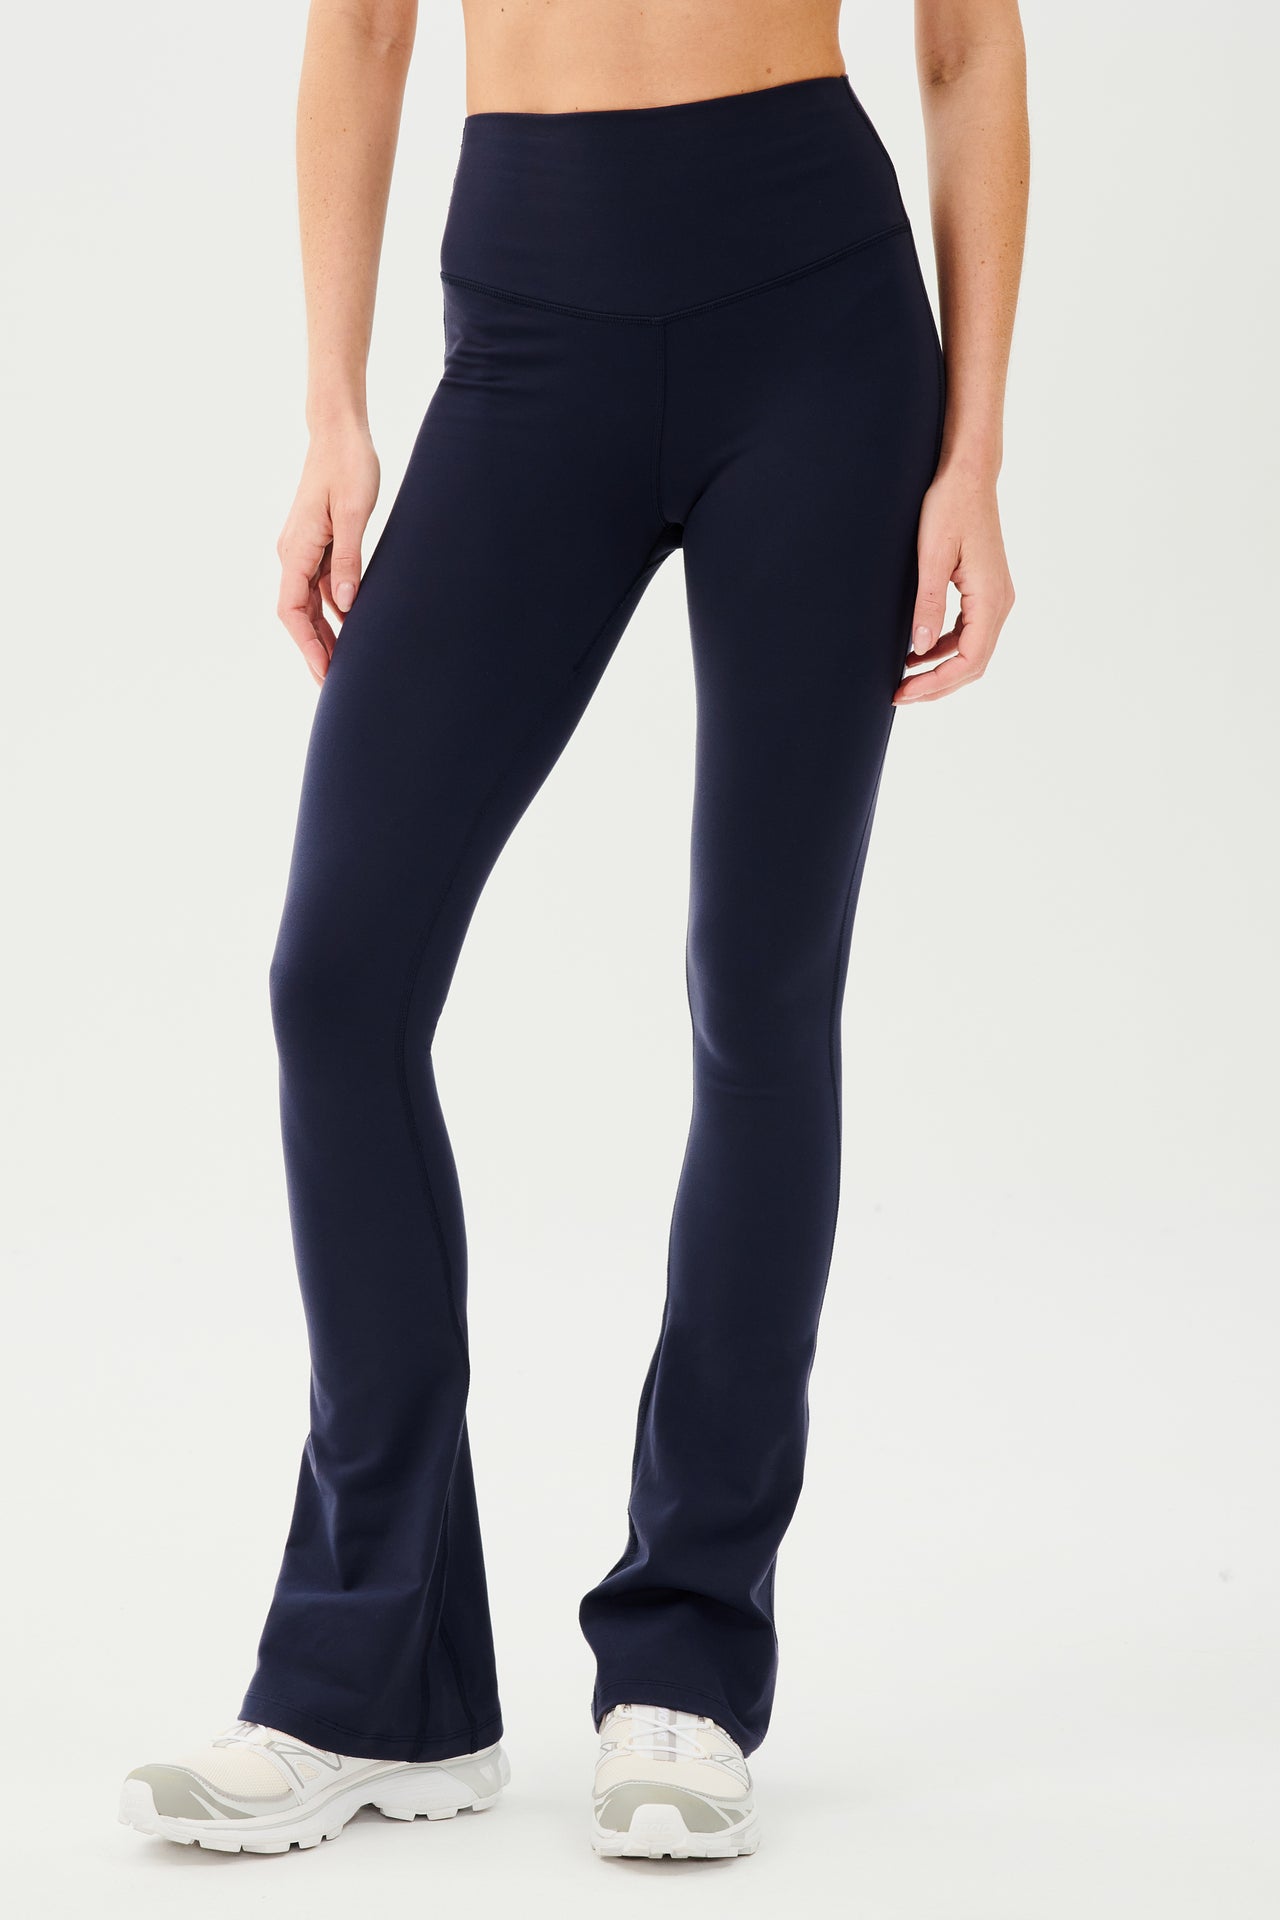 Front view of woman wearing dark blue high waist below ankle length legging with wide flared bottoms.Paired with white shoes. 